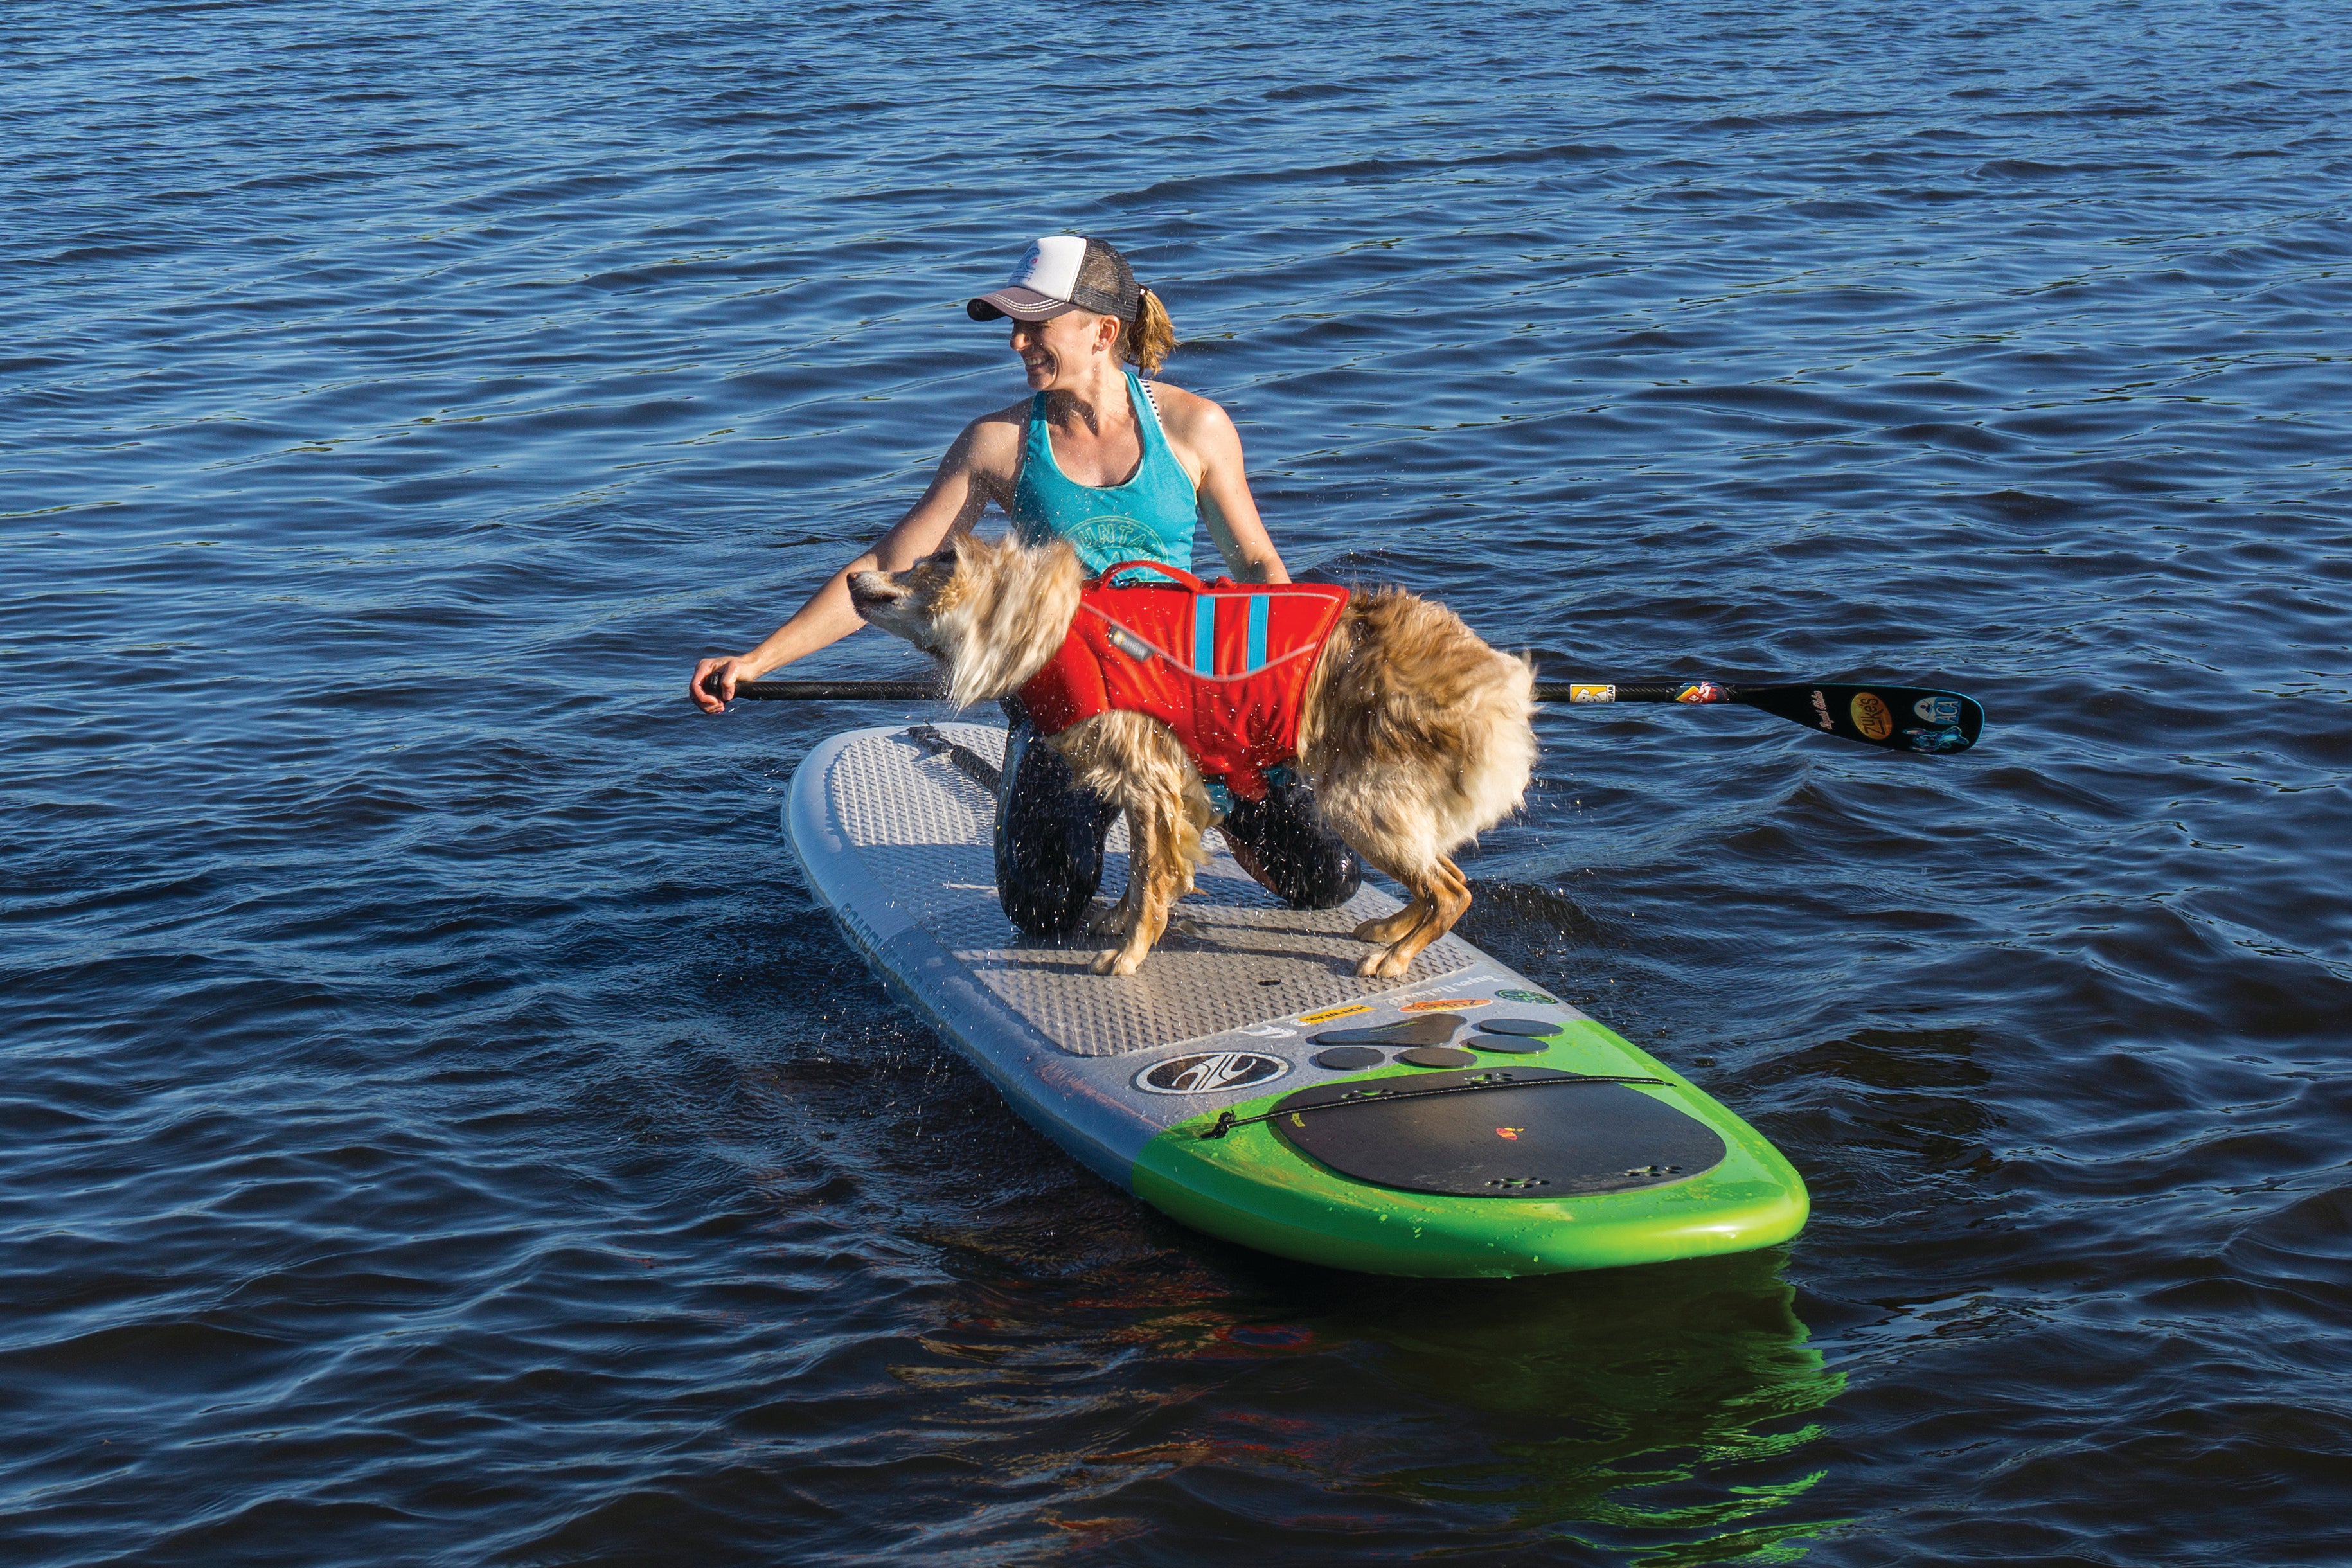 Maria helps bodie onto SUP using float coat handle for lift and assist.